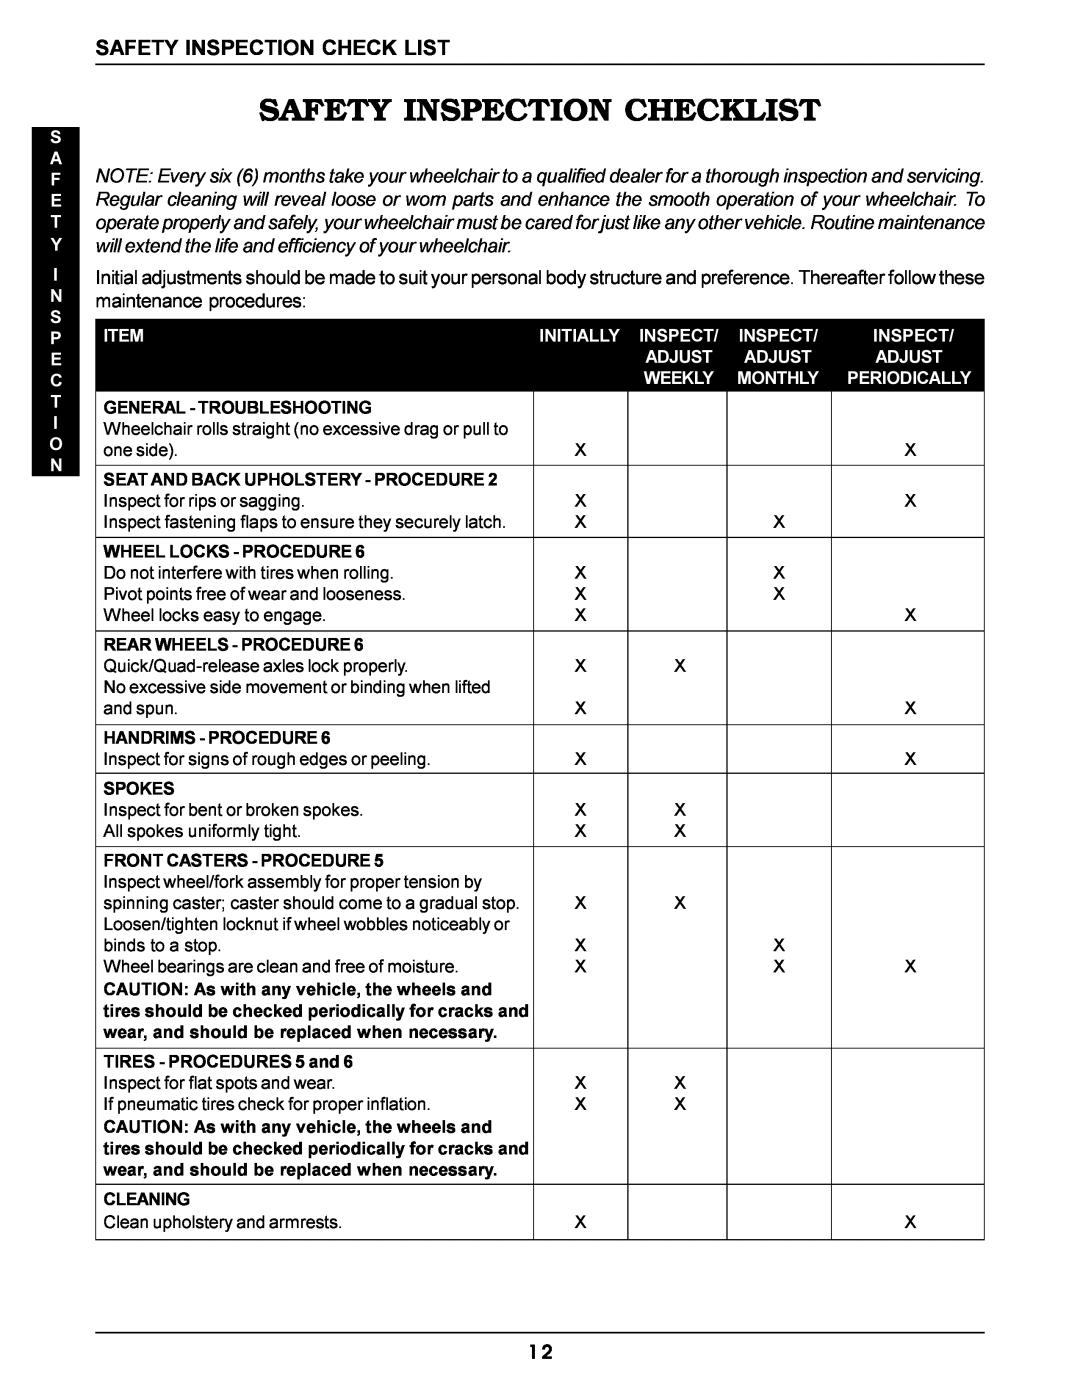 Invacare Pro Series manual Safety Inspection Checklist, Safety Inspection Check List 